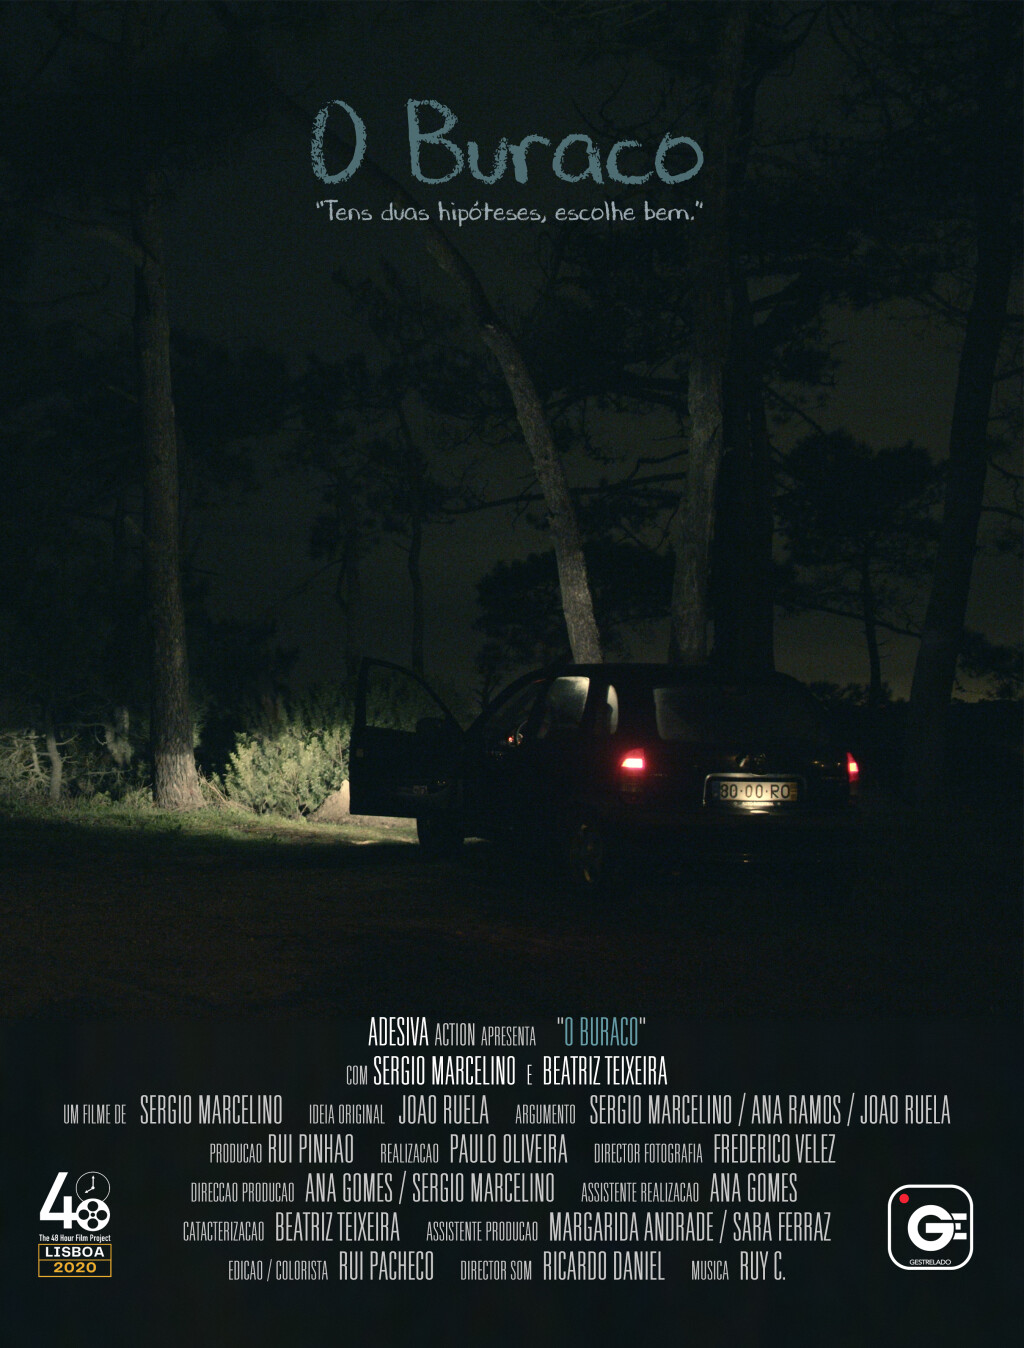 Filmposter for O Buraco